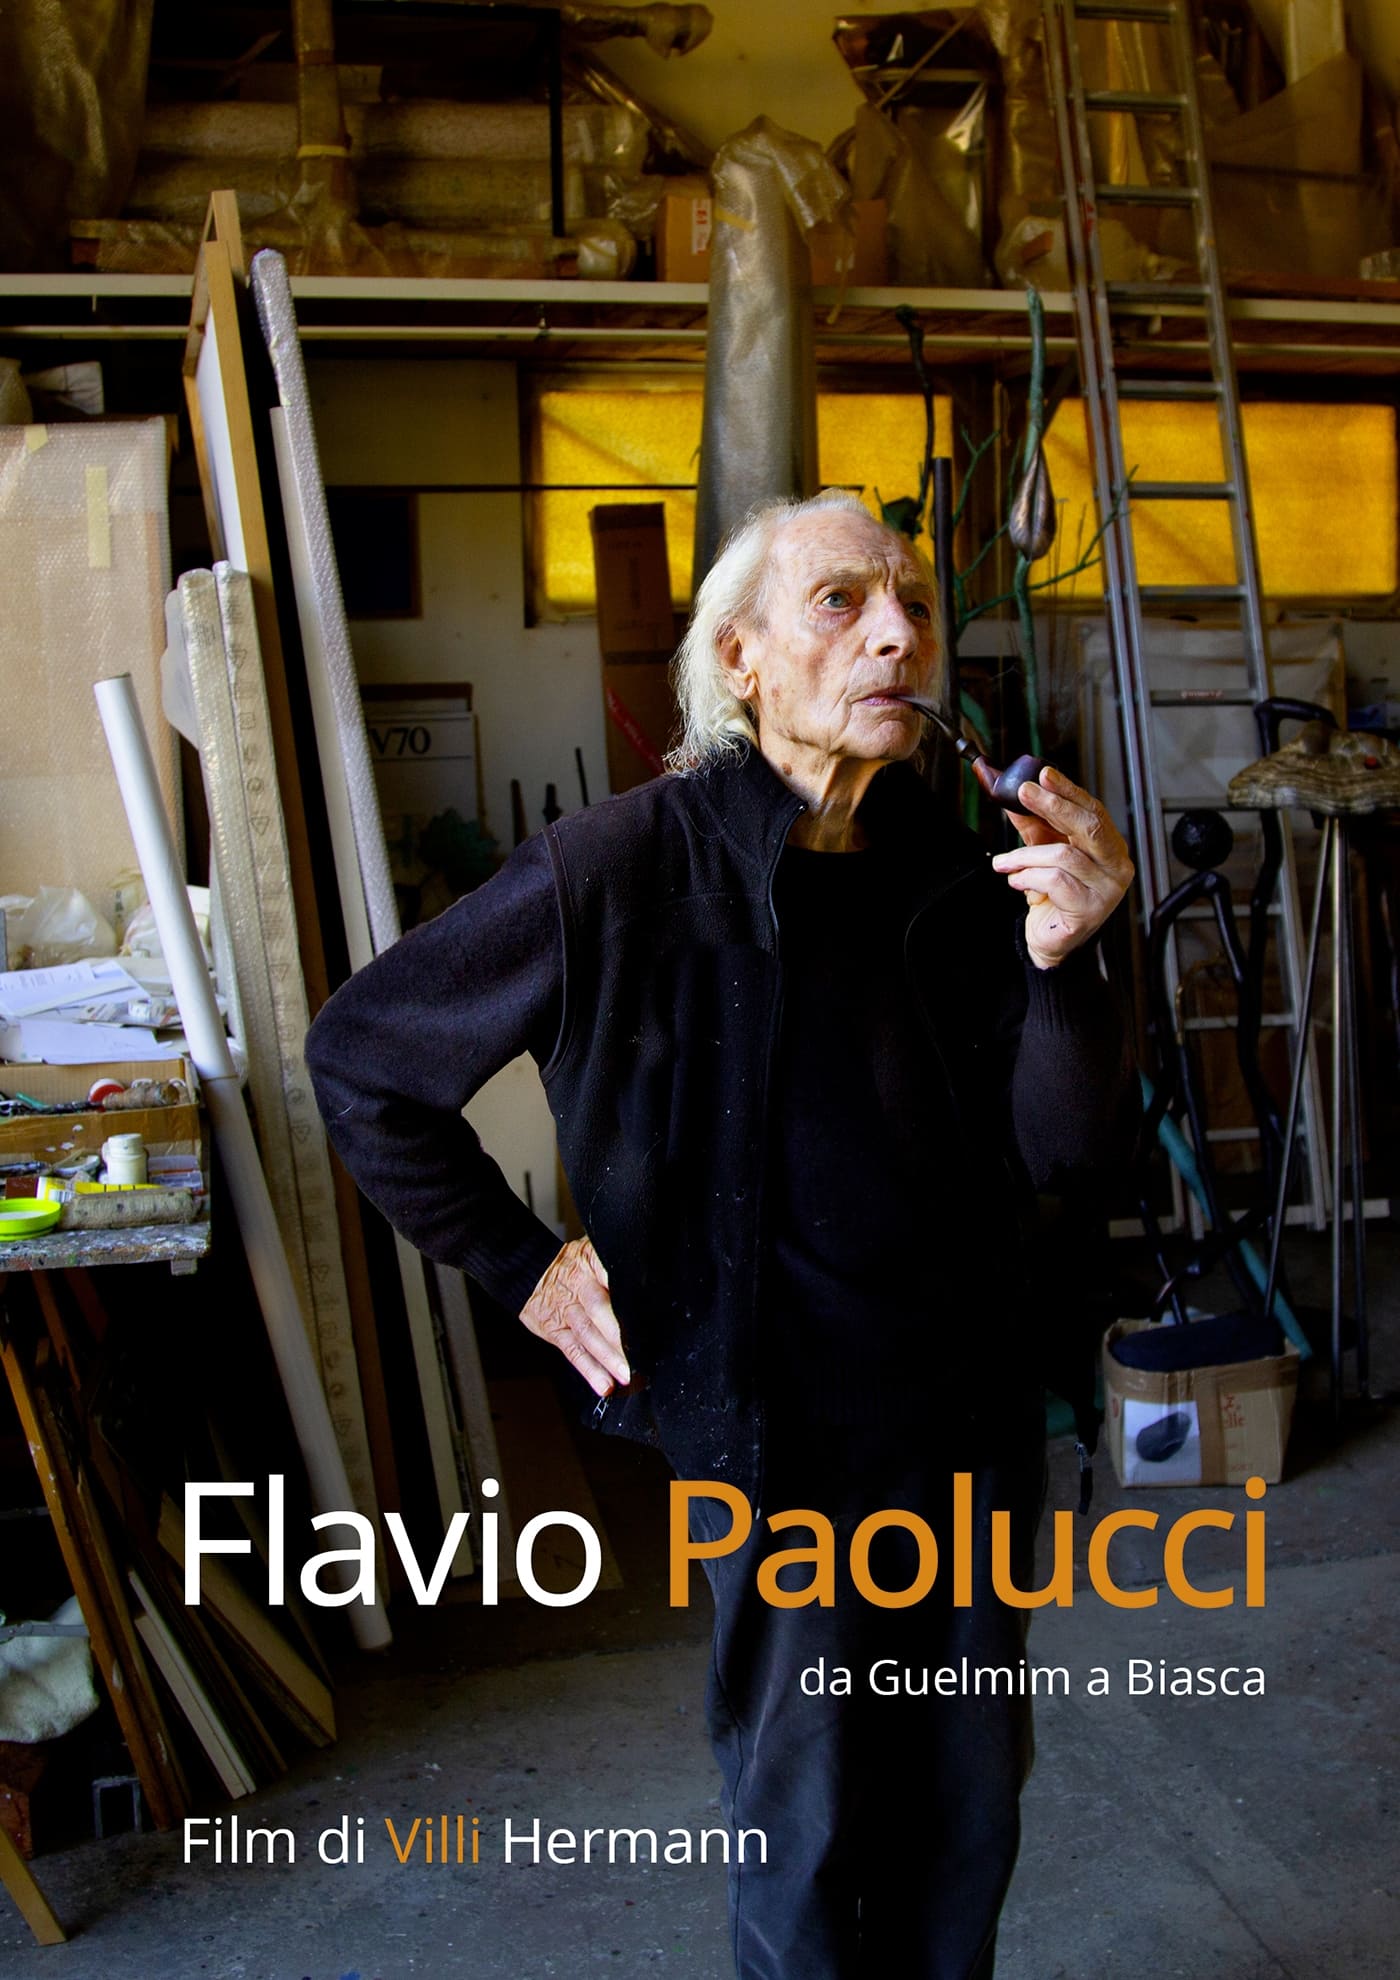 Flavio Paolucci. From Guelmim to Biasca